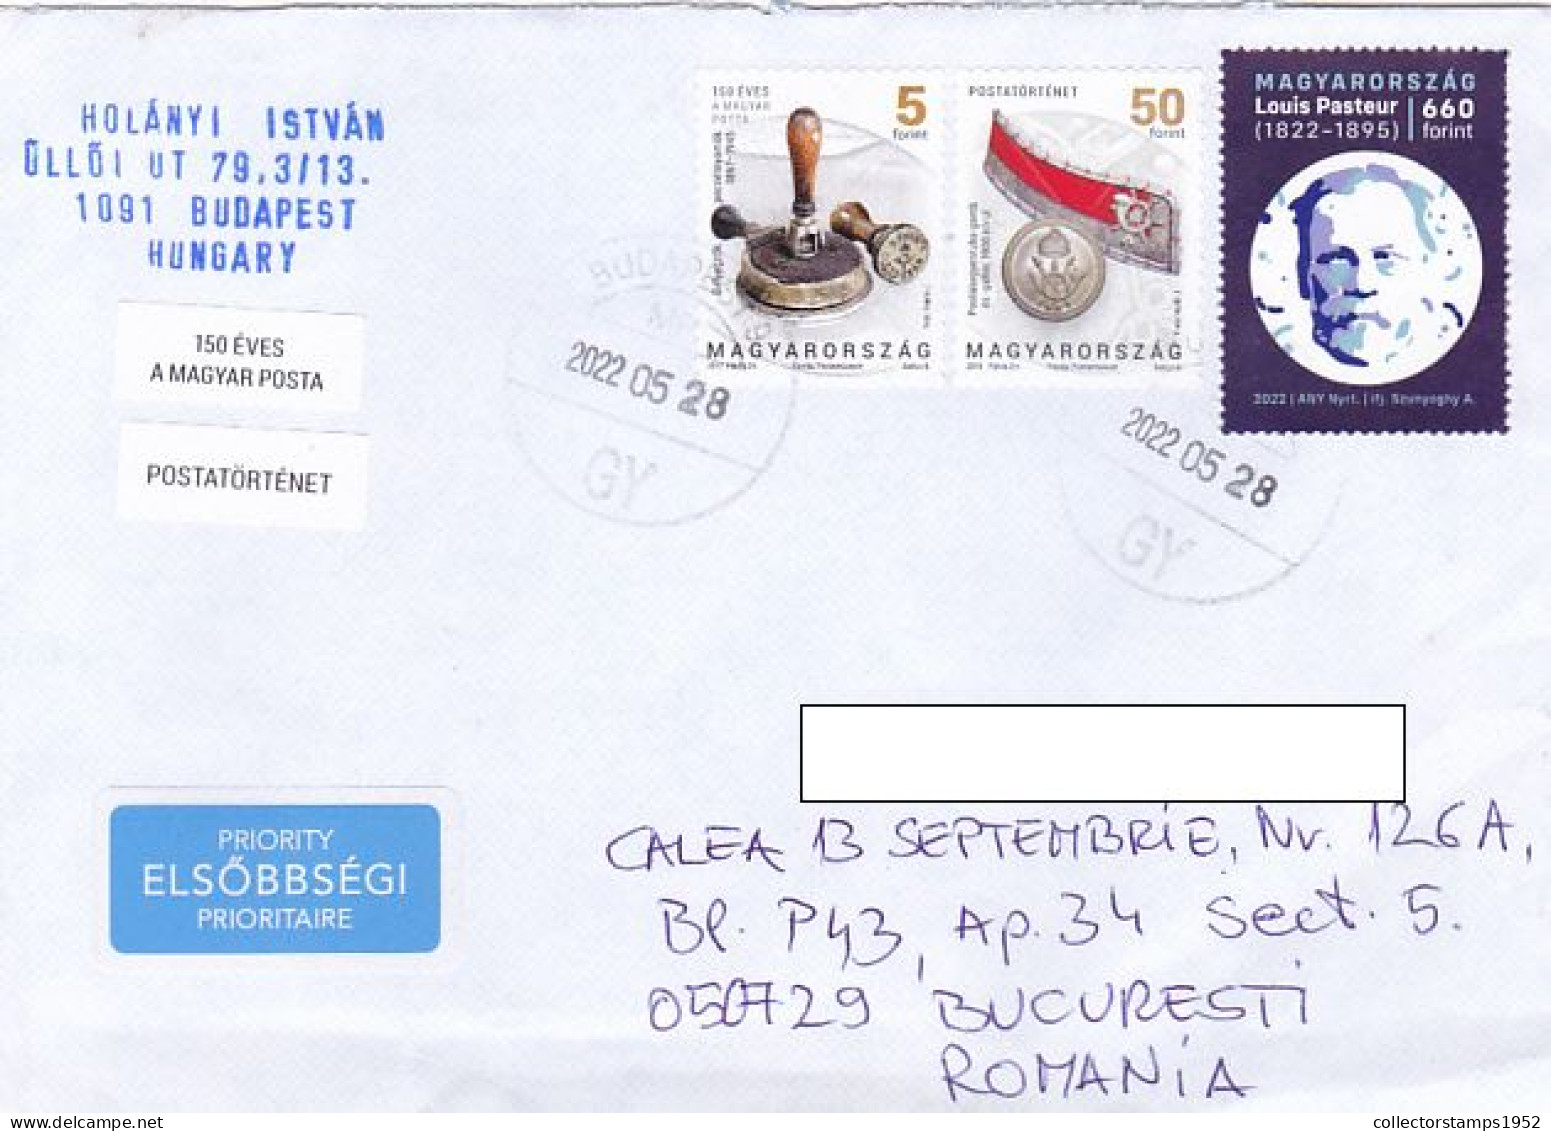 INK STAMP, POSTMAN UNIFORM DETAILS, LOUIS PASTEUR, STAMPS ON COVER, 2022, HUNGARY - Covers & Documents